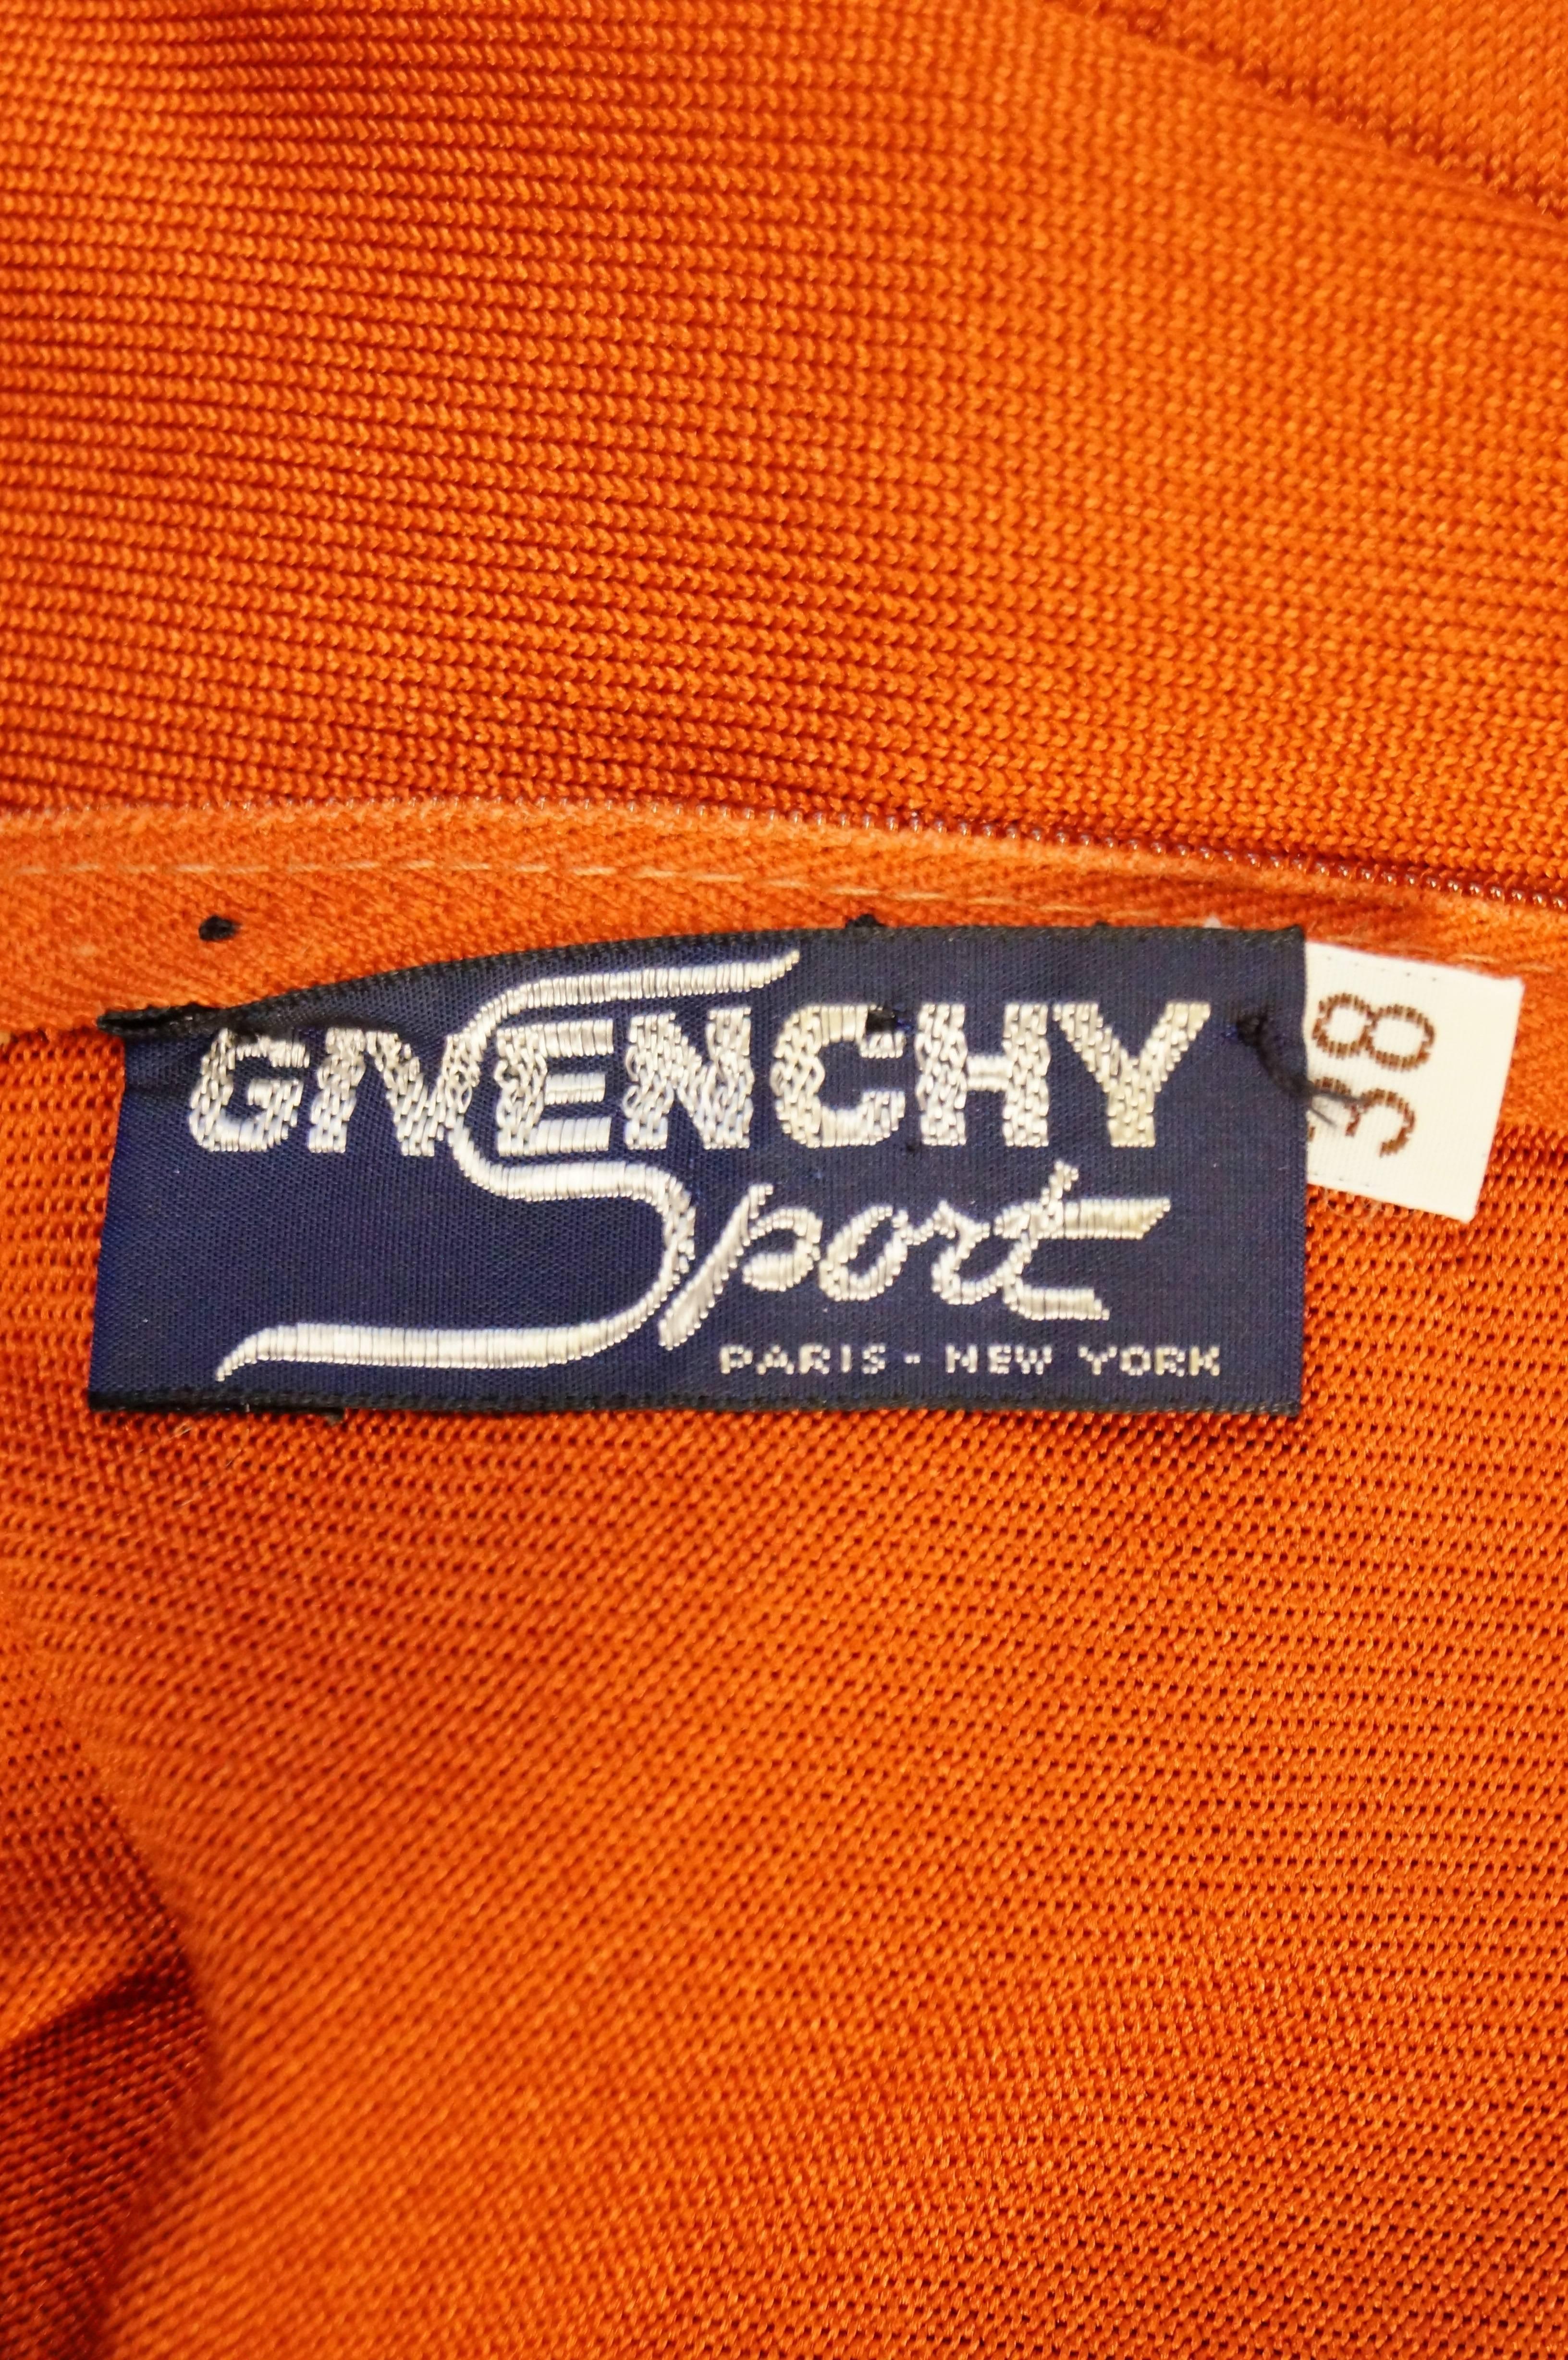 Givenchy Sport Tangerine Orange Pullover Sweater, 1970s  8